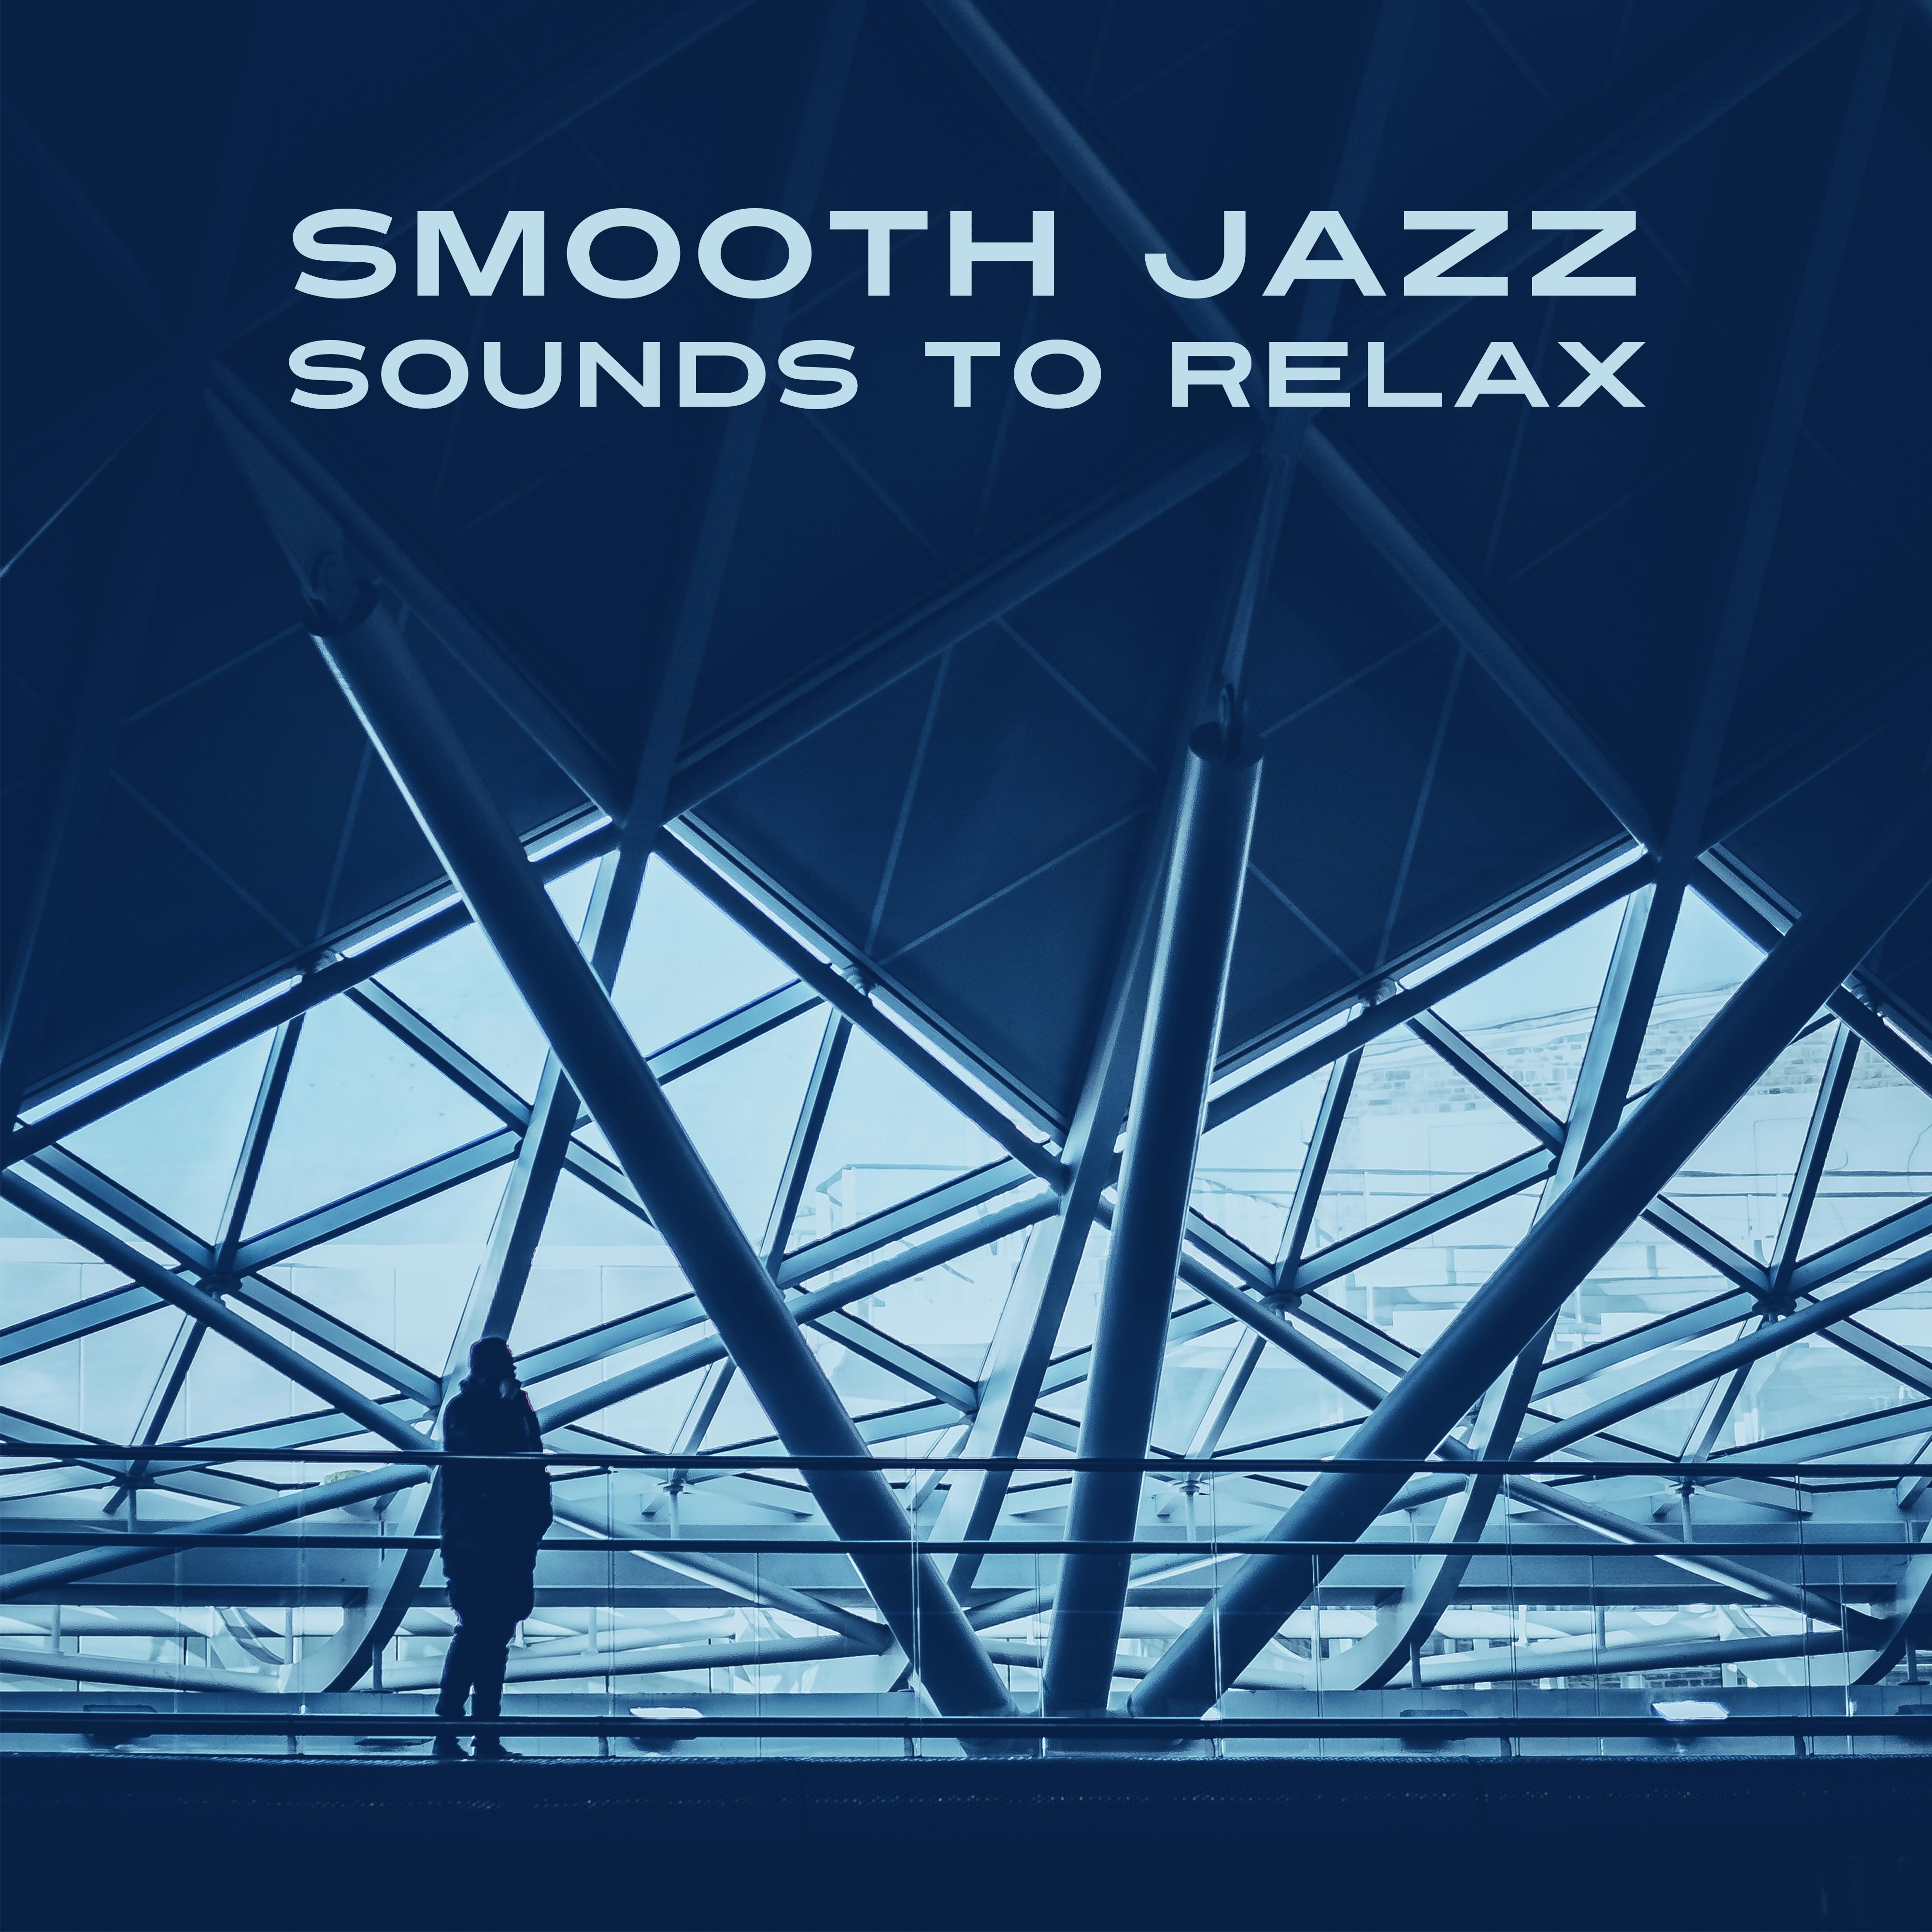 Smooth Jazz Sounds to Relax  Relaxing Jazz Music, Rest with Piano, Moonlight Note, Calm Down